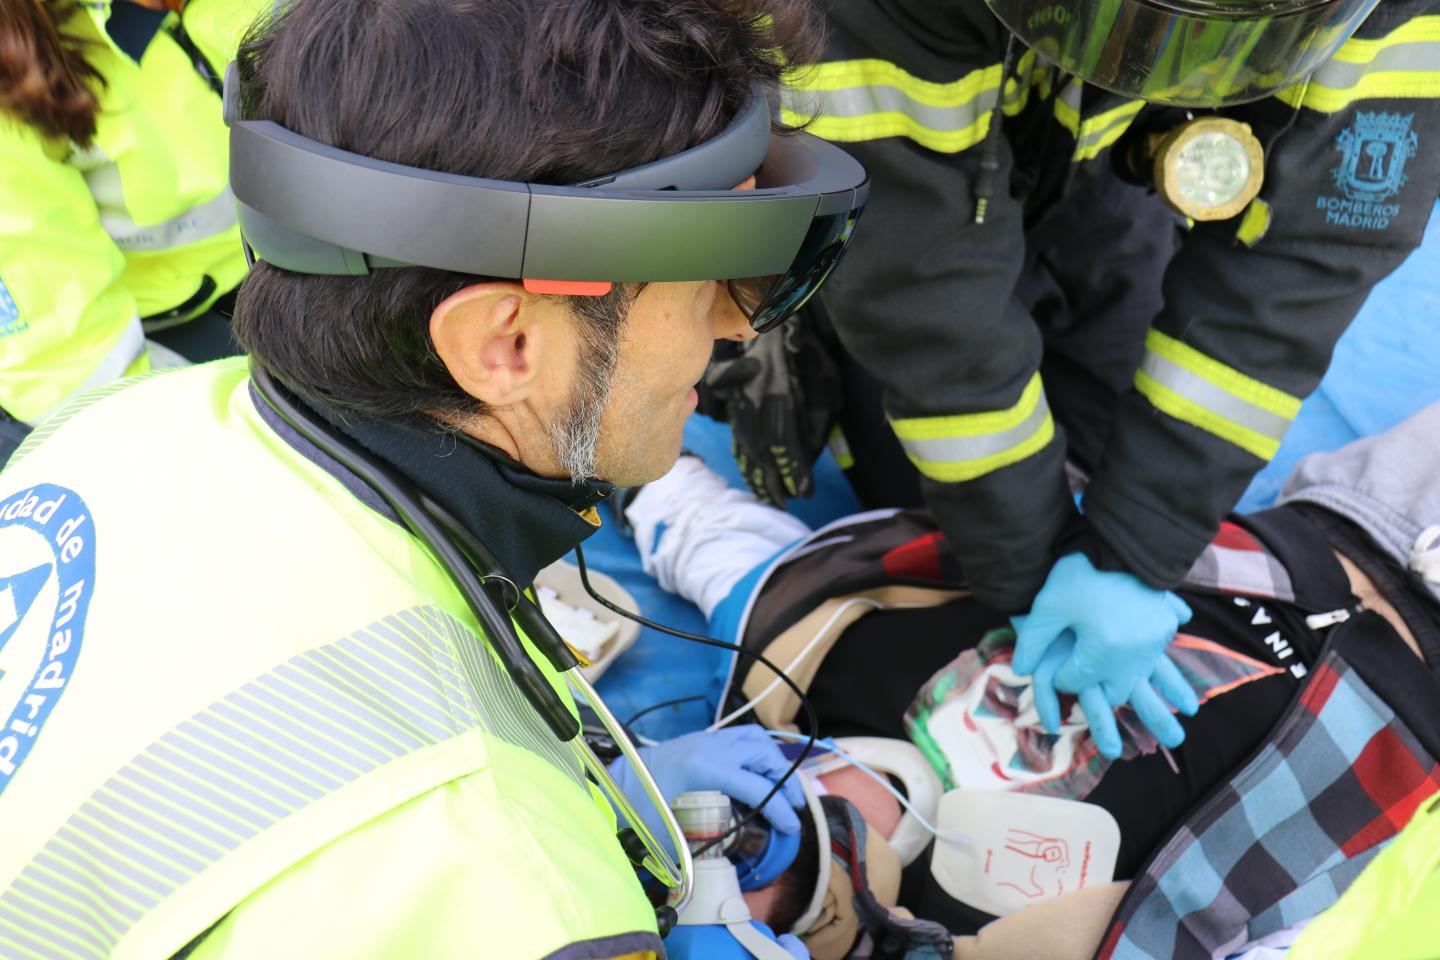 Augmented Reality Devices Improve the Assistance Provided by the Medical Professionals